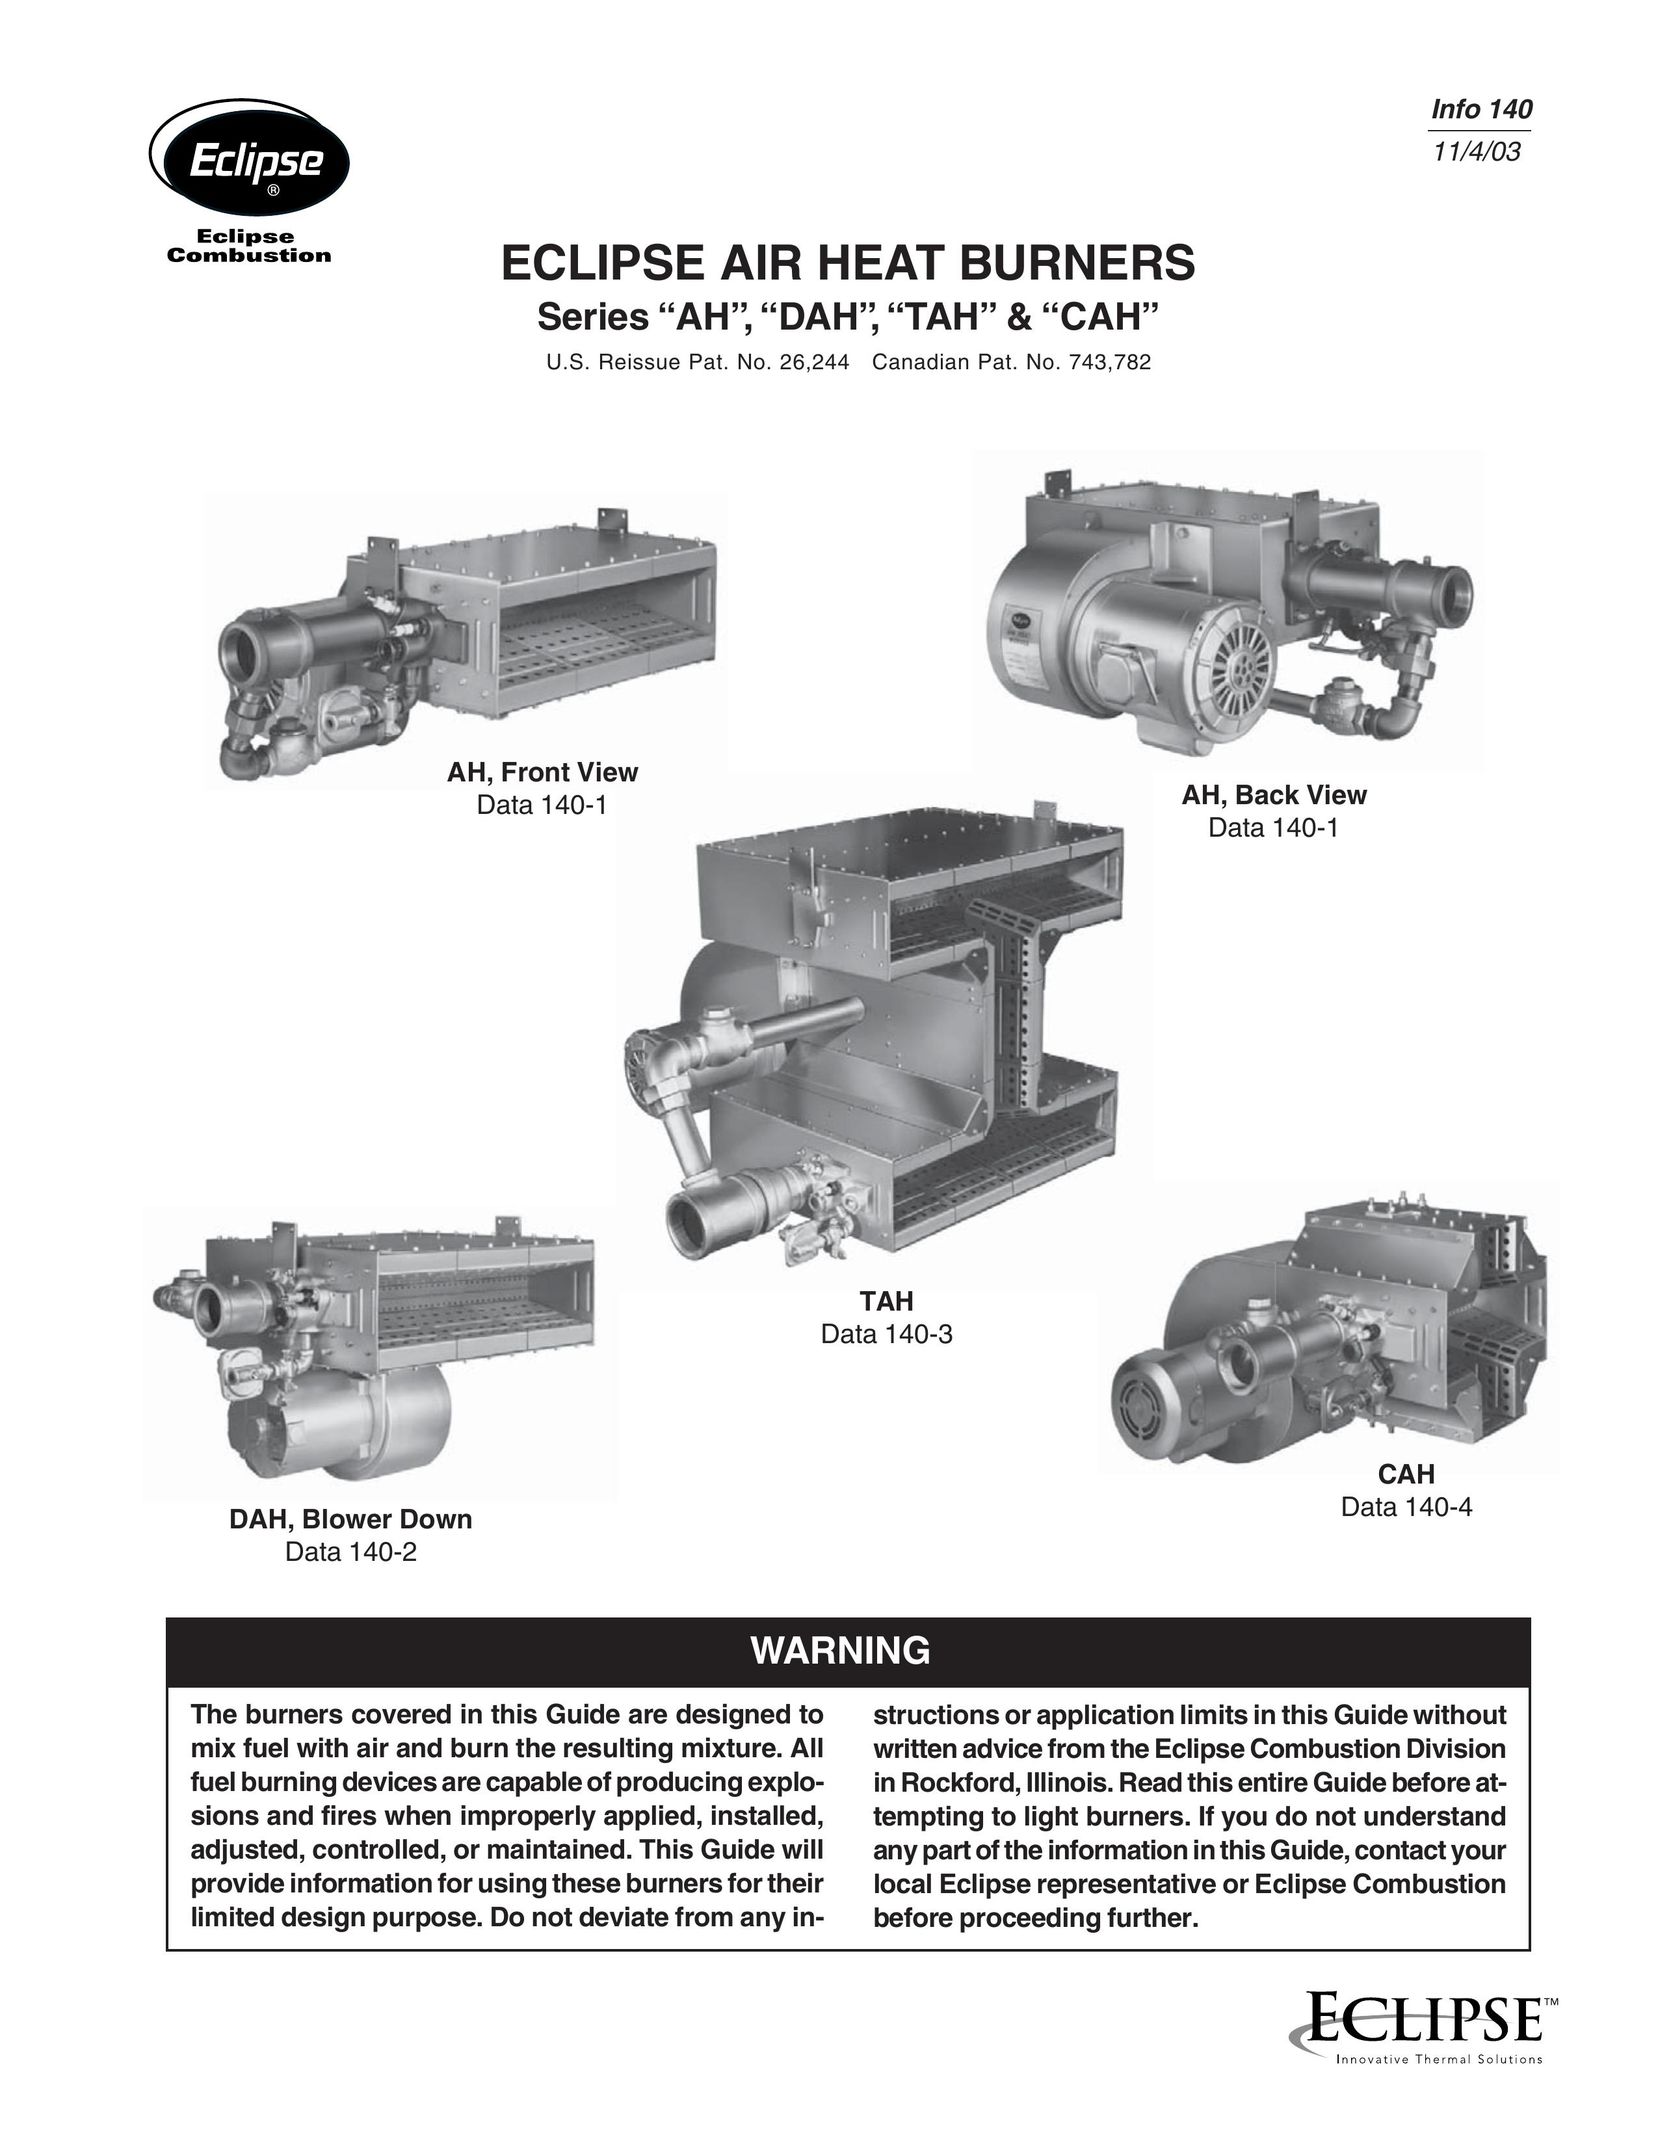 Eclipse Combustion DAH Air Conditioner User Manual